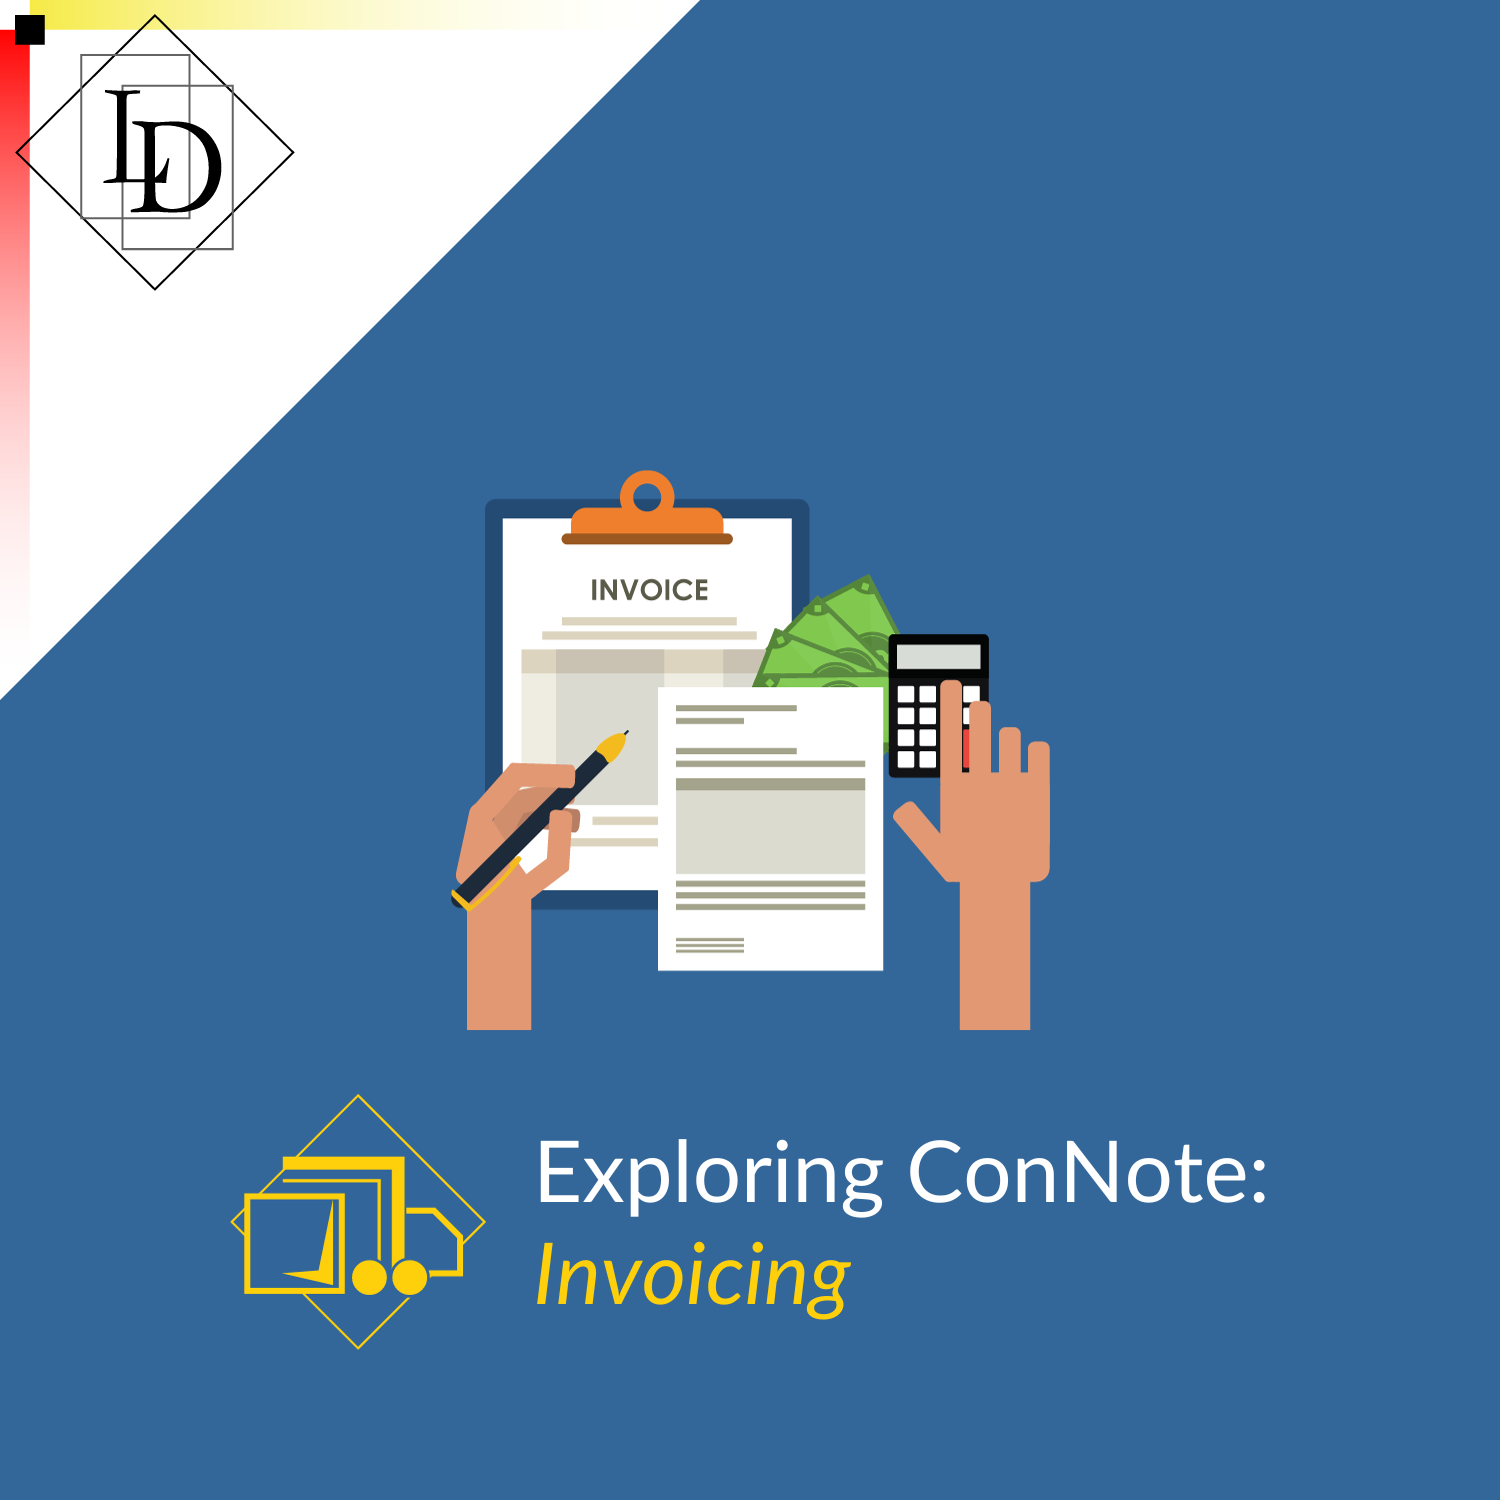 The upper left corner of the image is a white background with the LD logo in black. The remainder is in LD blue, with the ConNote logo and the words "Exploring ConNote: Invoicing" as a caption. A graphic depicting a manual invoicing process is in the centre.